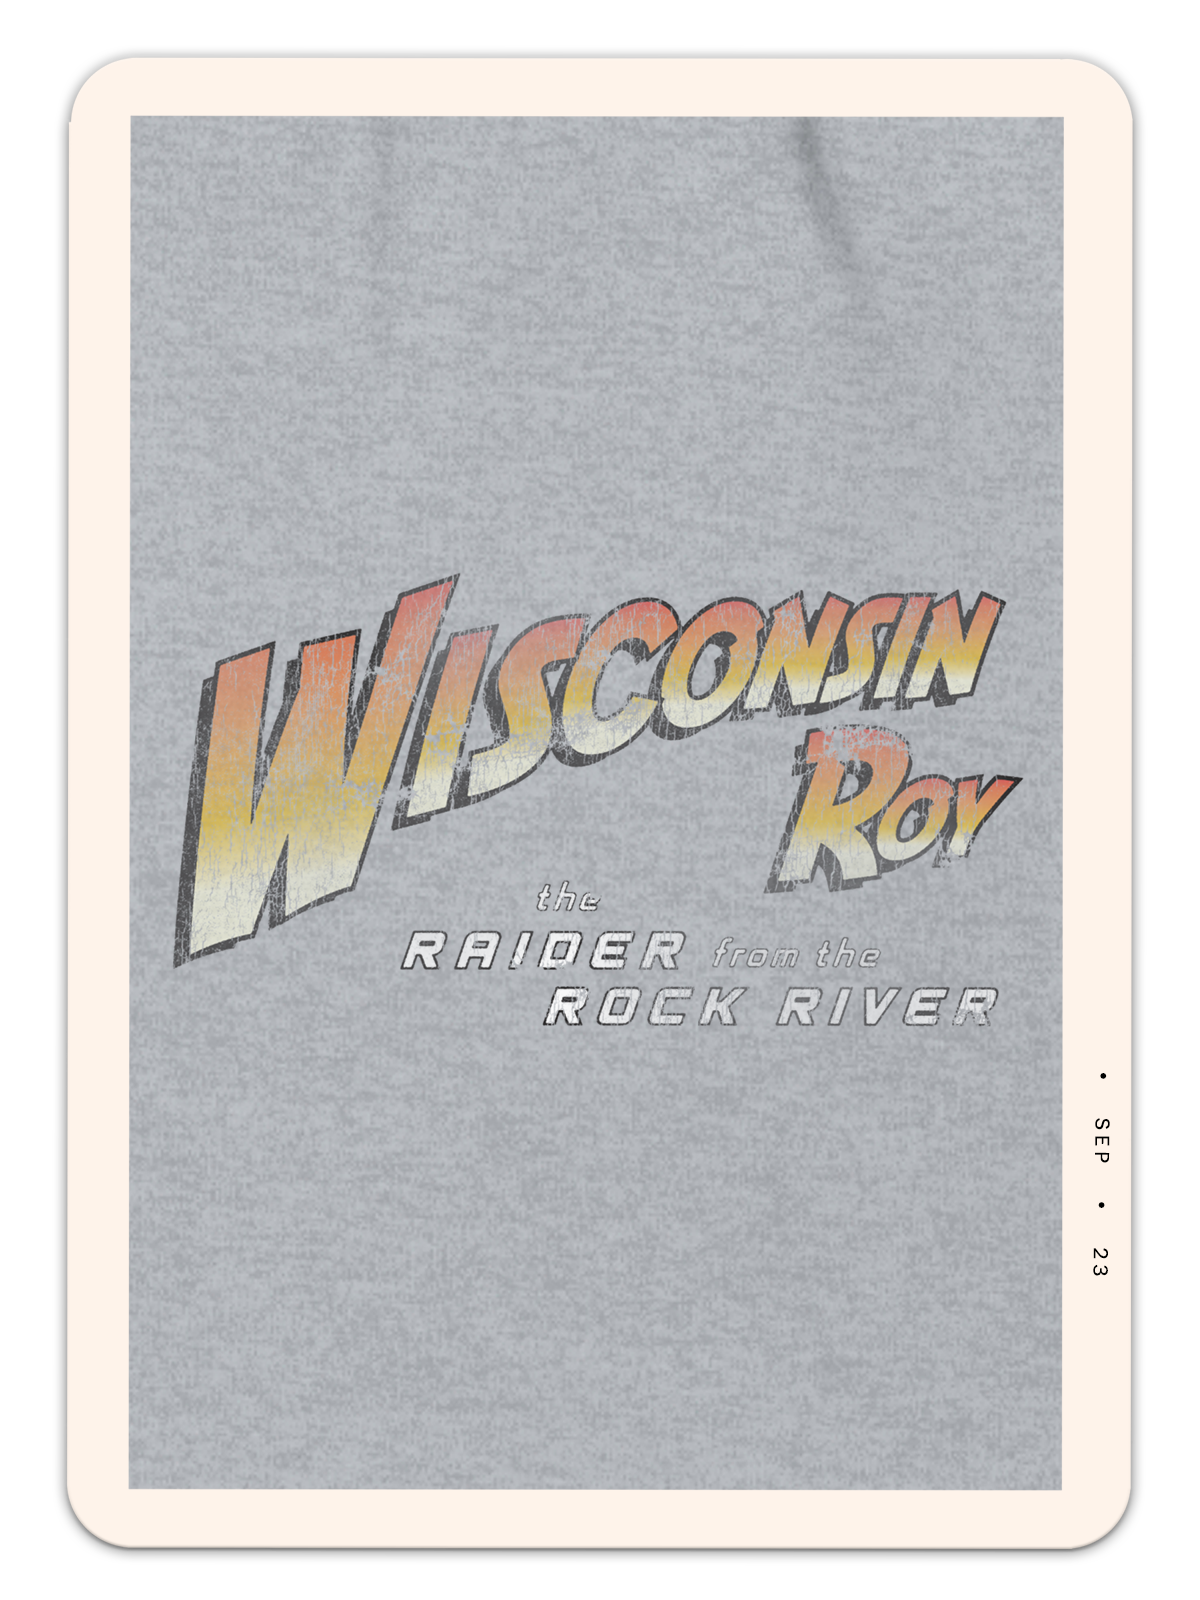 Wisconsin Roy, The Raider from the Rock River Adult Crewneck Sweatshirt